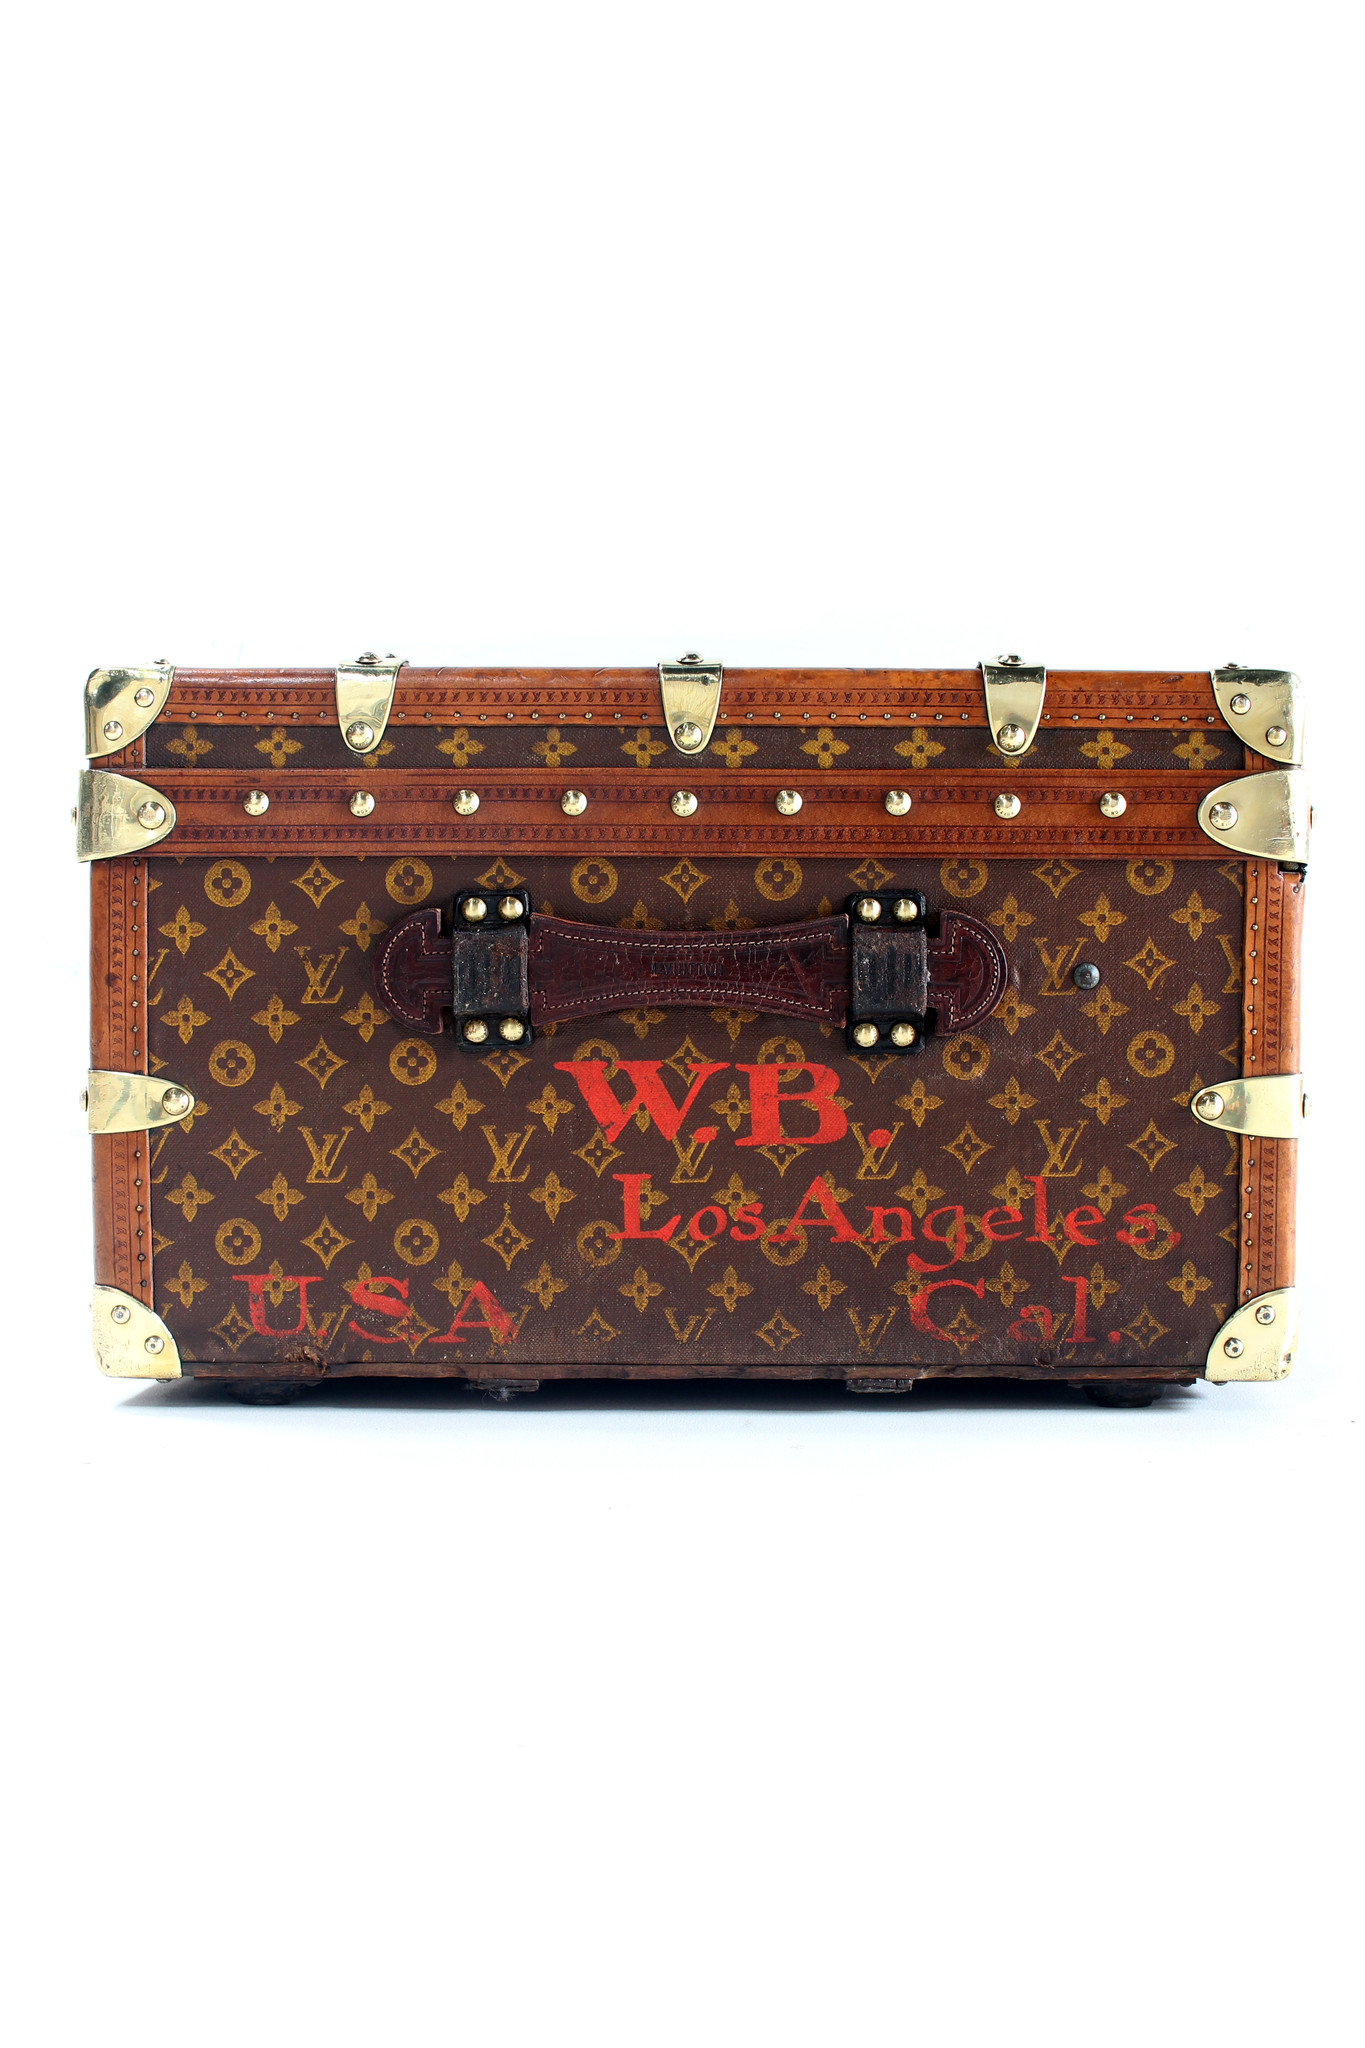 Louis Vuitton trunk - THE HOUSE OF WAUW